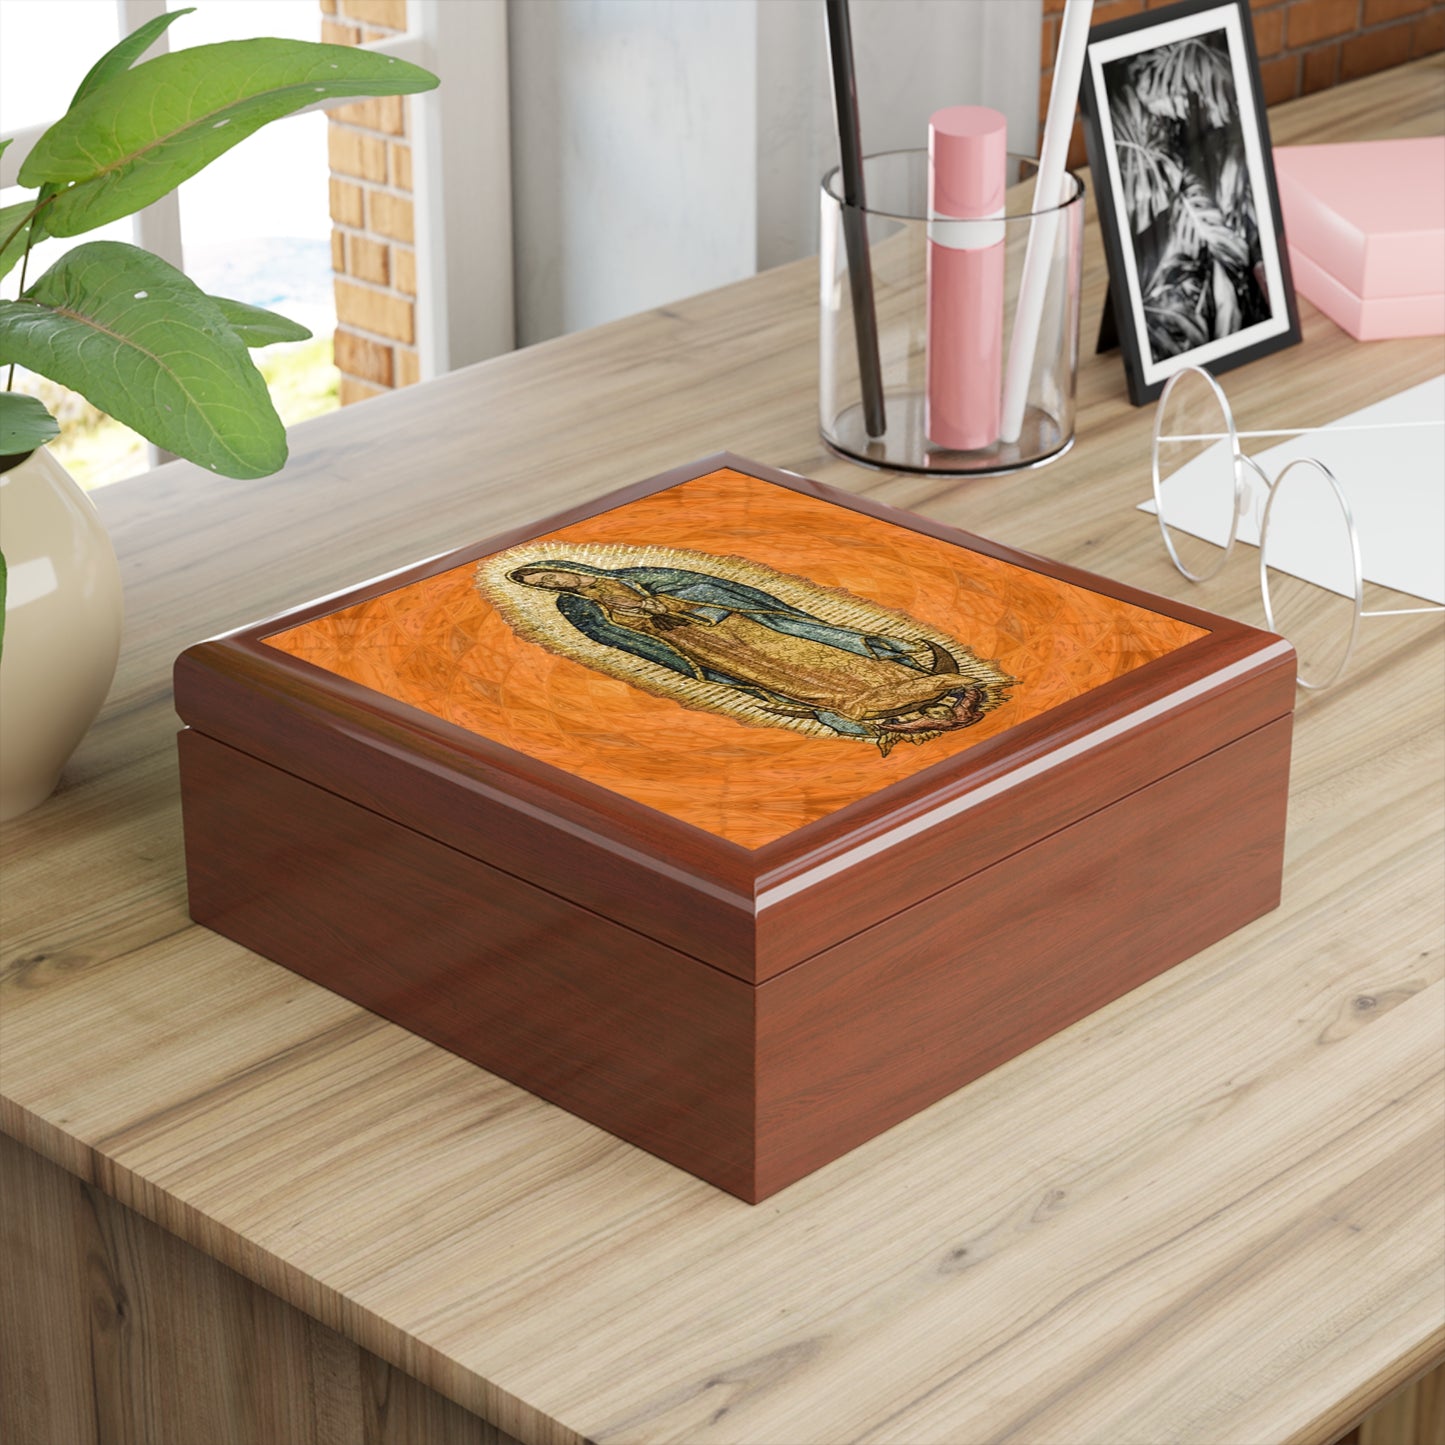 Our Lady of Guadalupe #ReliquaryBox #JewelryBox